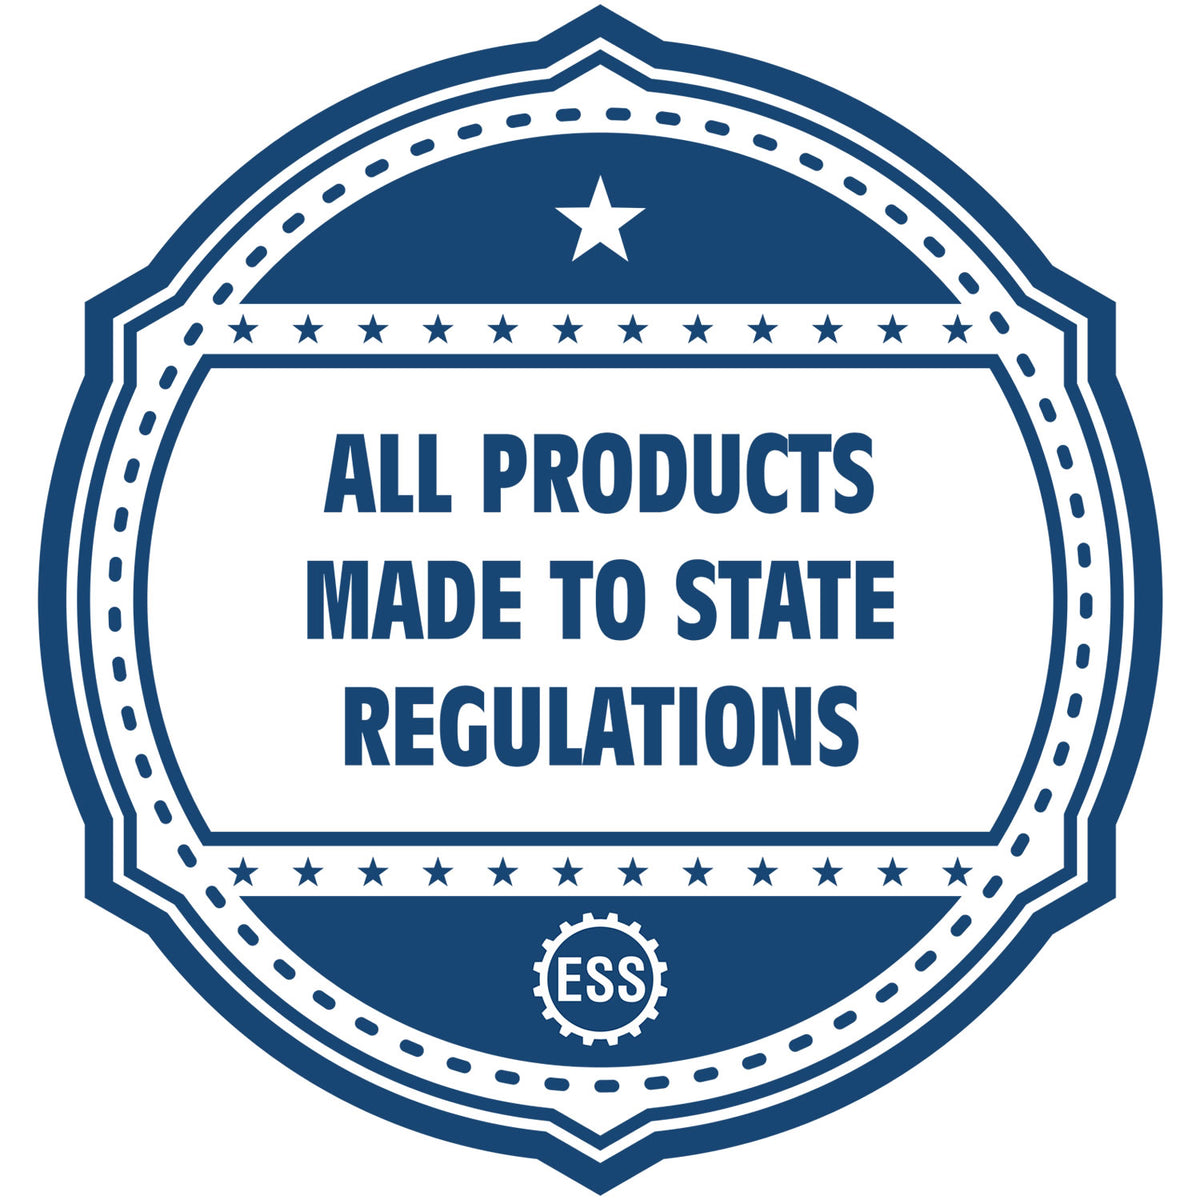 An icon or badge element for the Soft California Professional Engineer Seal showing that this product is made in compliance with state regulations.